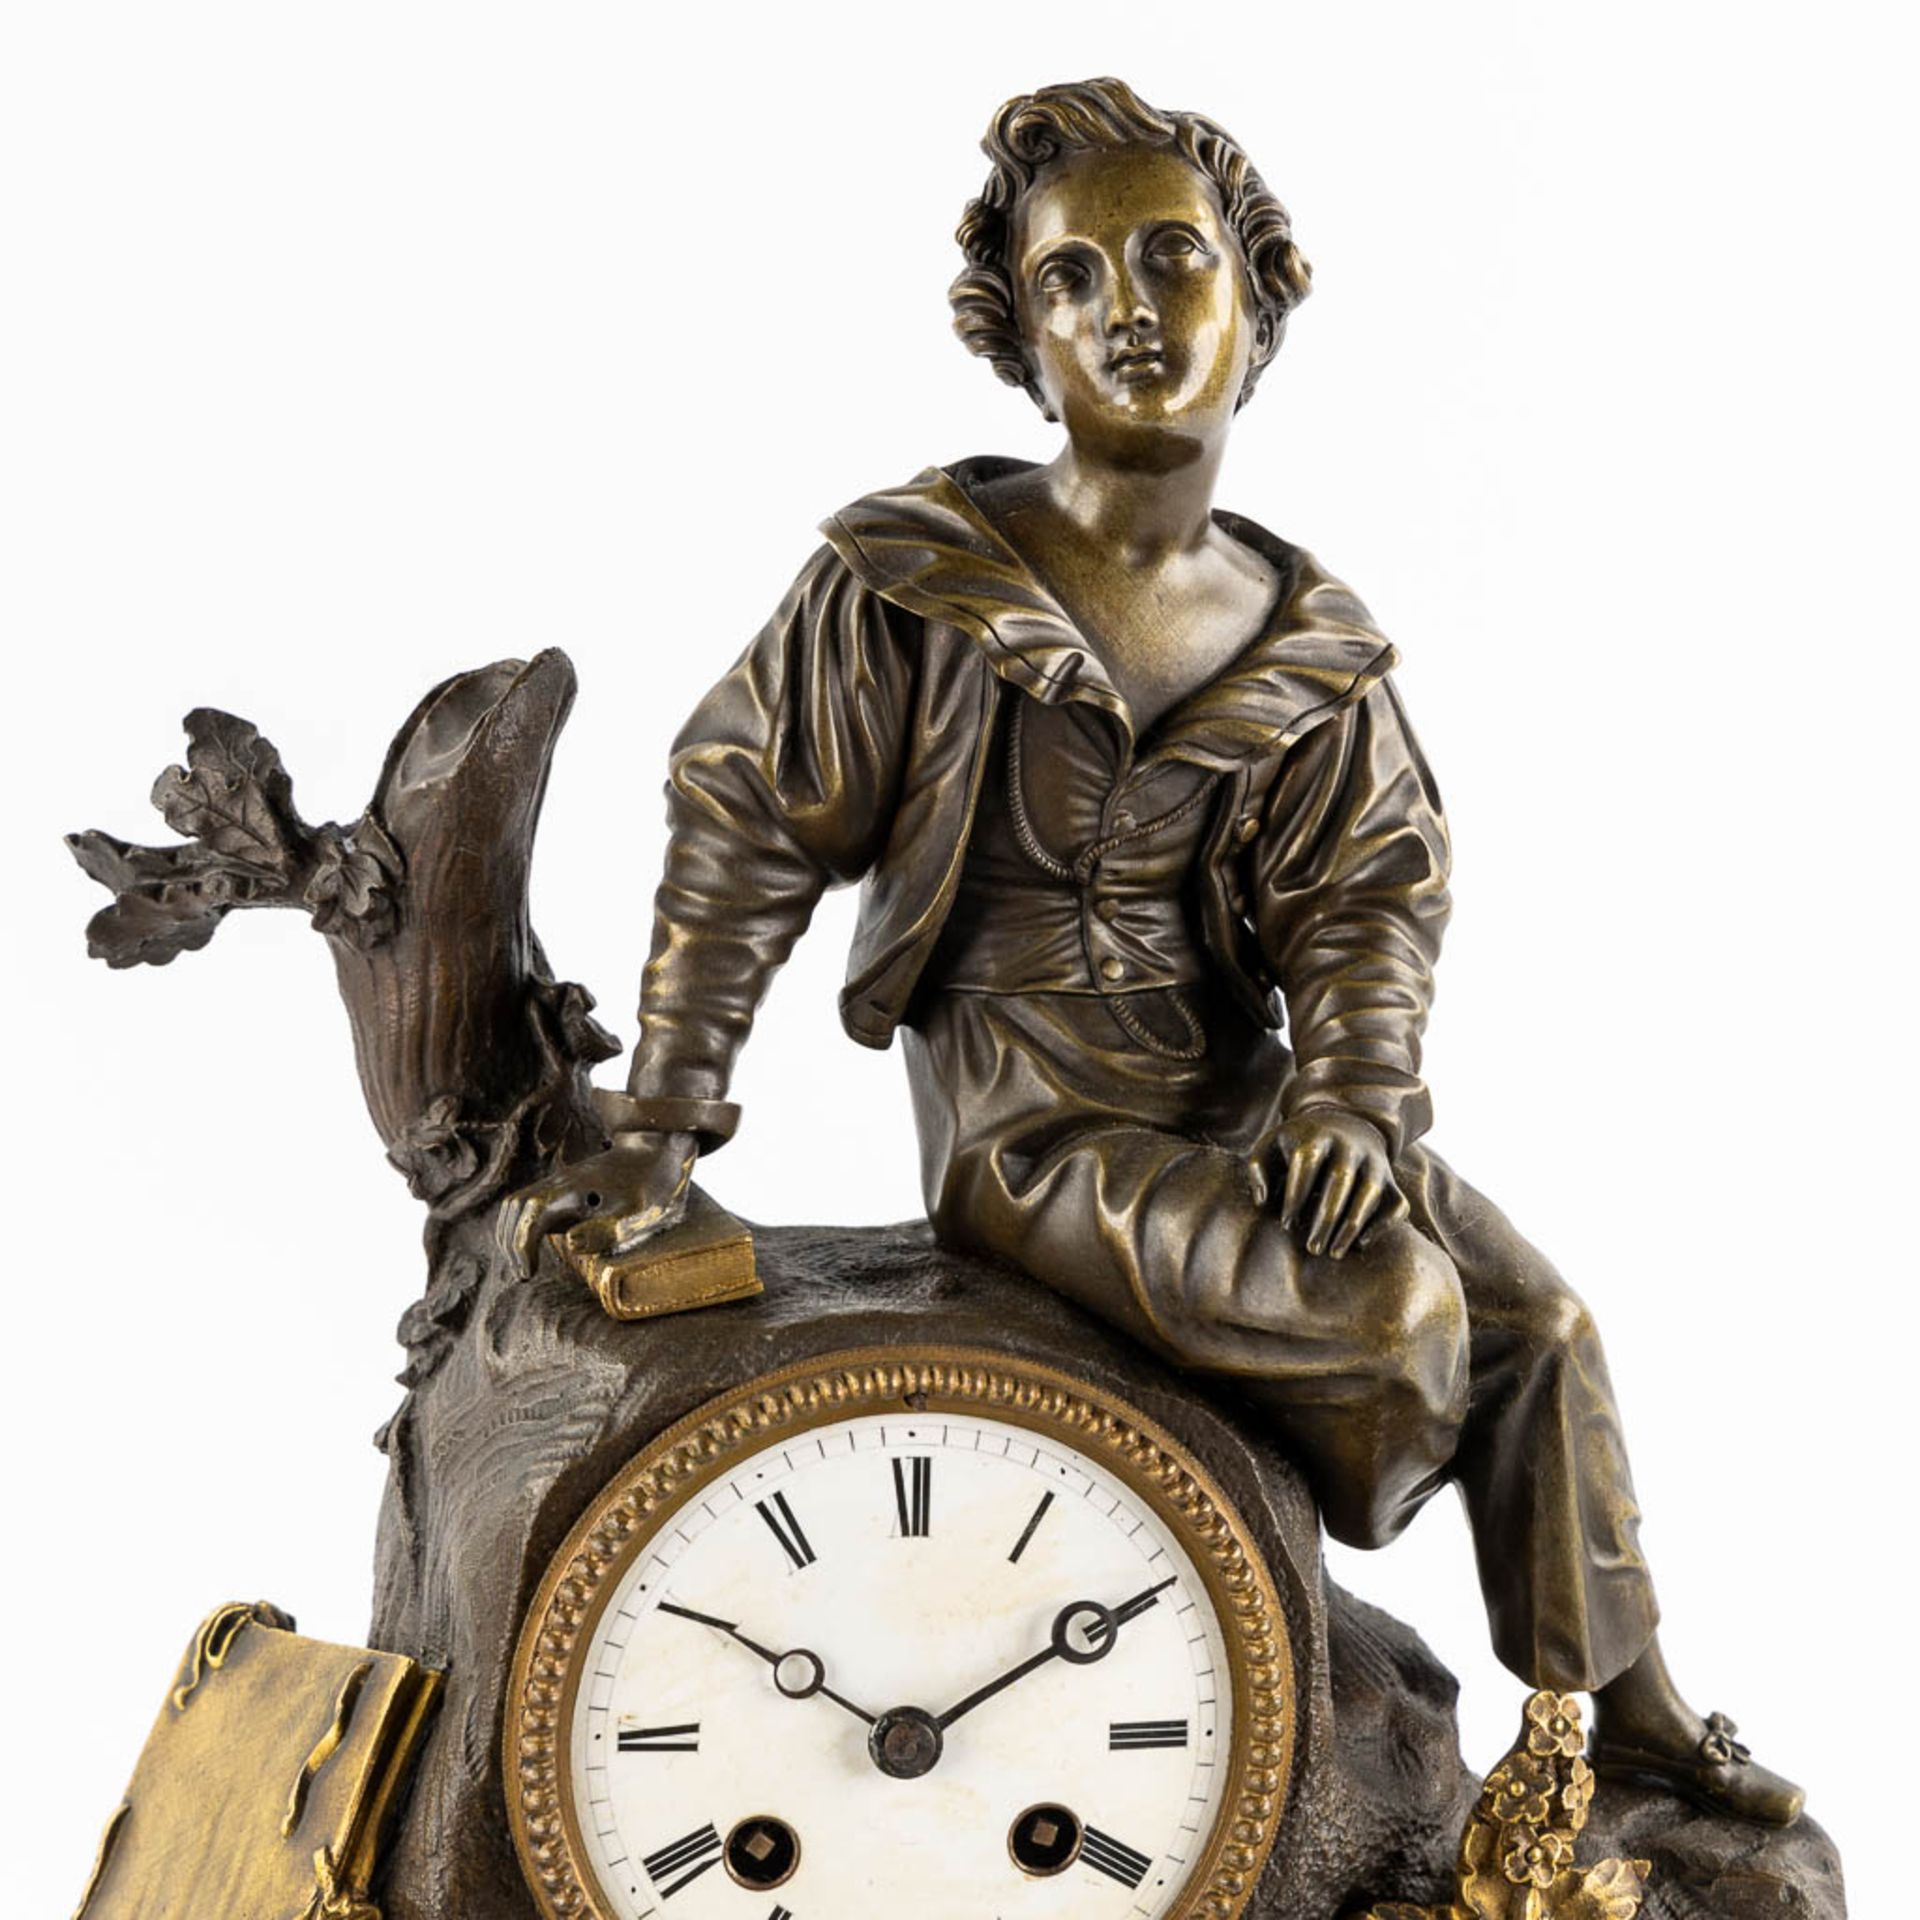 A mantle clock, gilt and patinated bronze, Empire style. 19th C. (L:13 x W:34 x H:46 cm) - Image 7 of 9